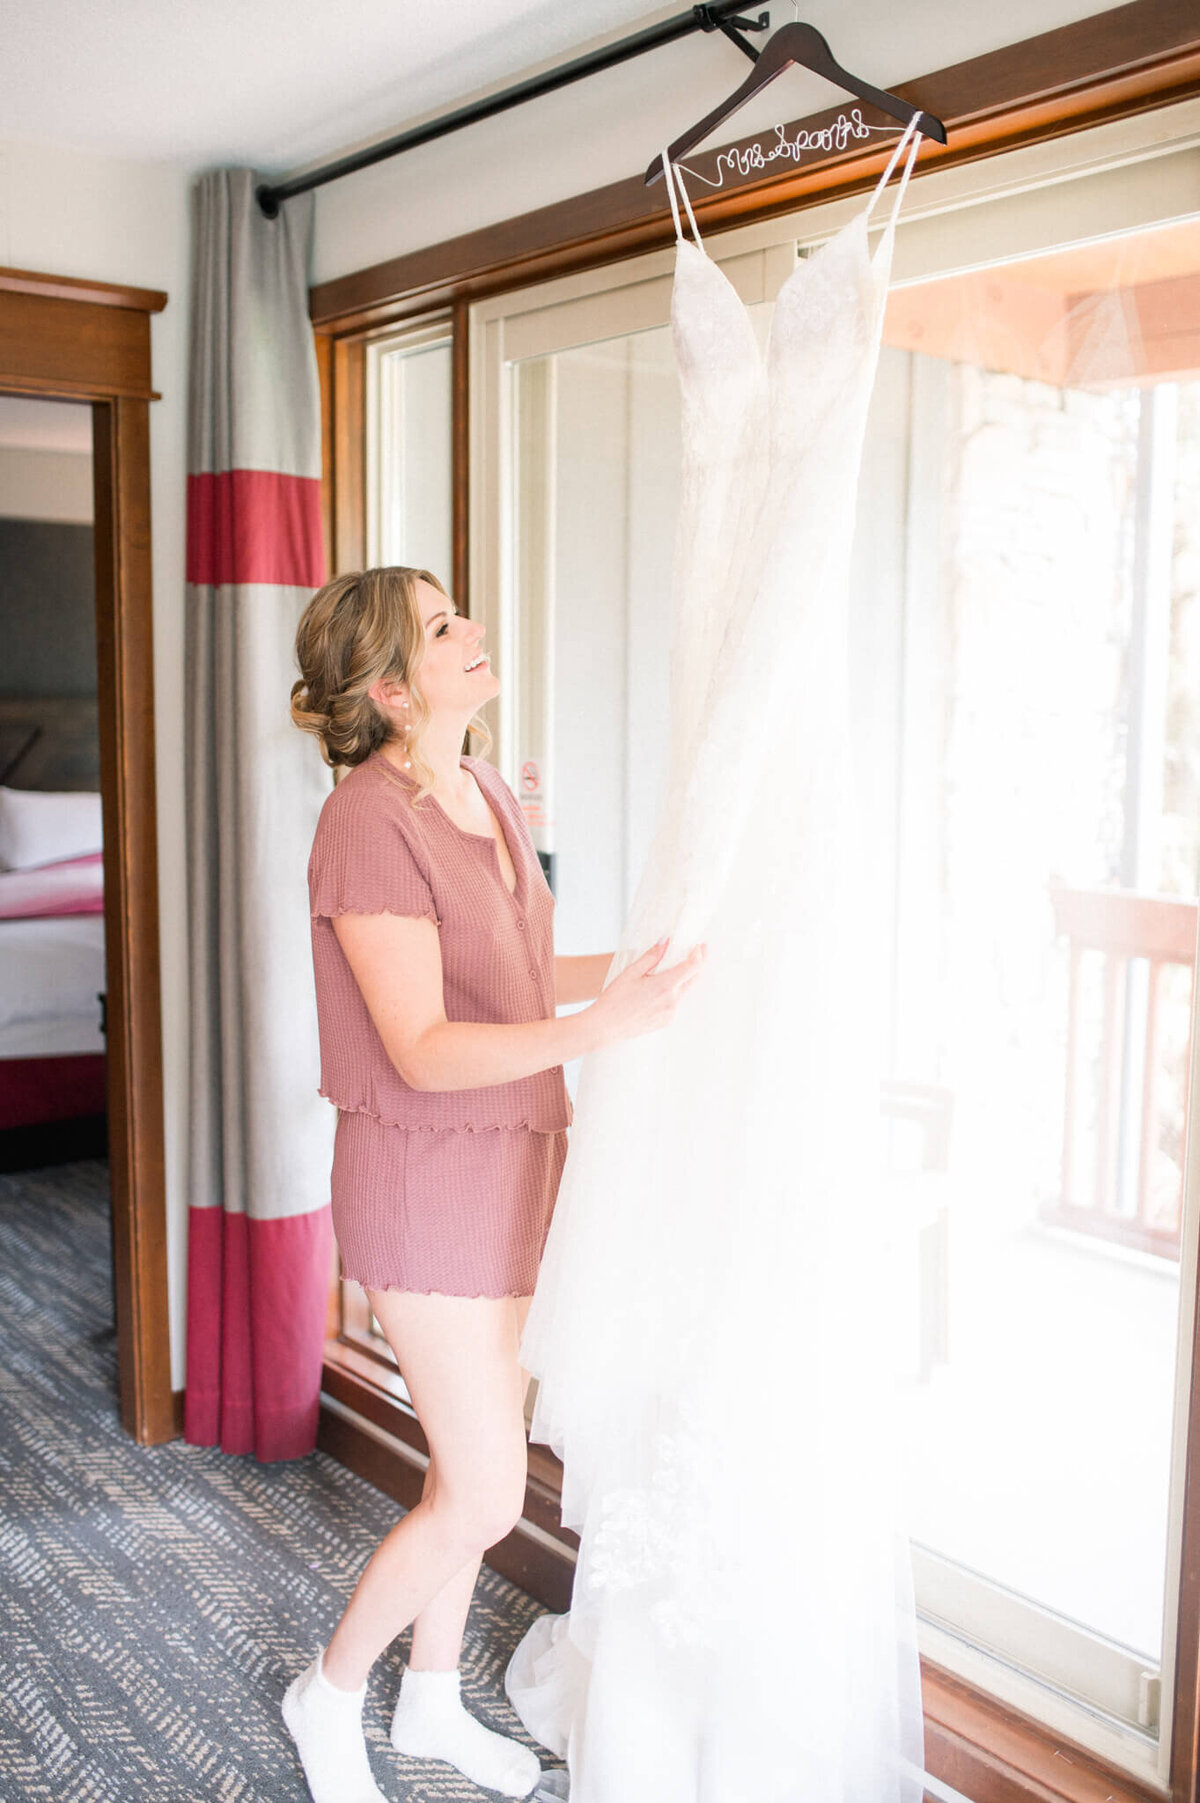 Bride looking at dress hanging in window captured by Toronto wedding photographer